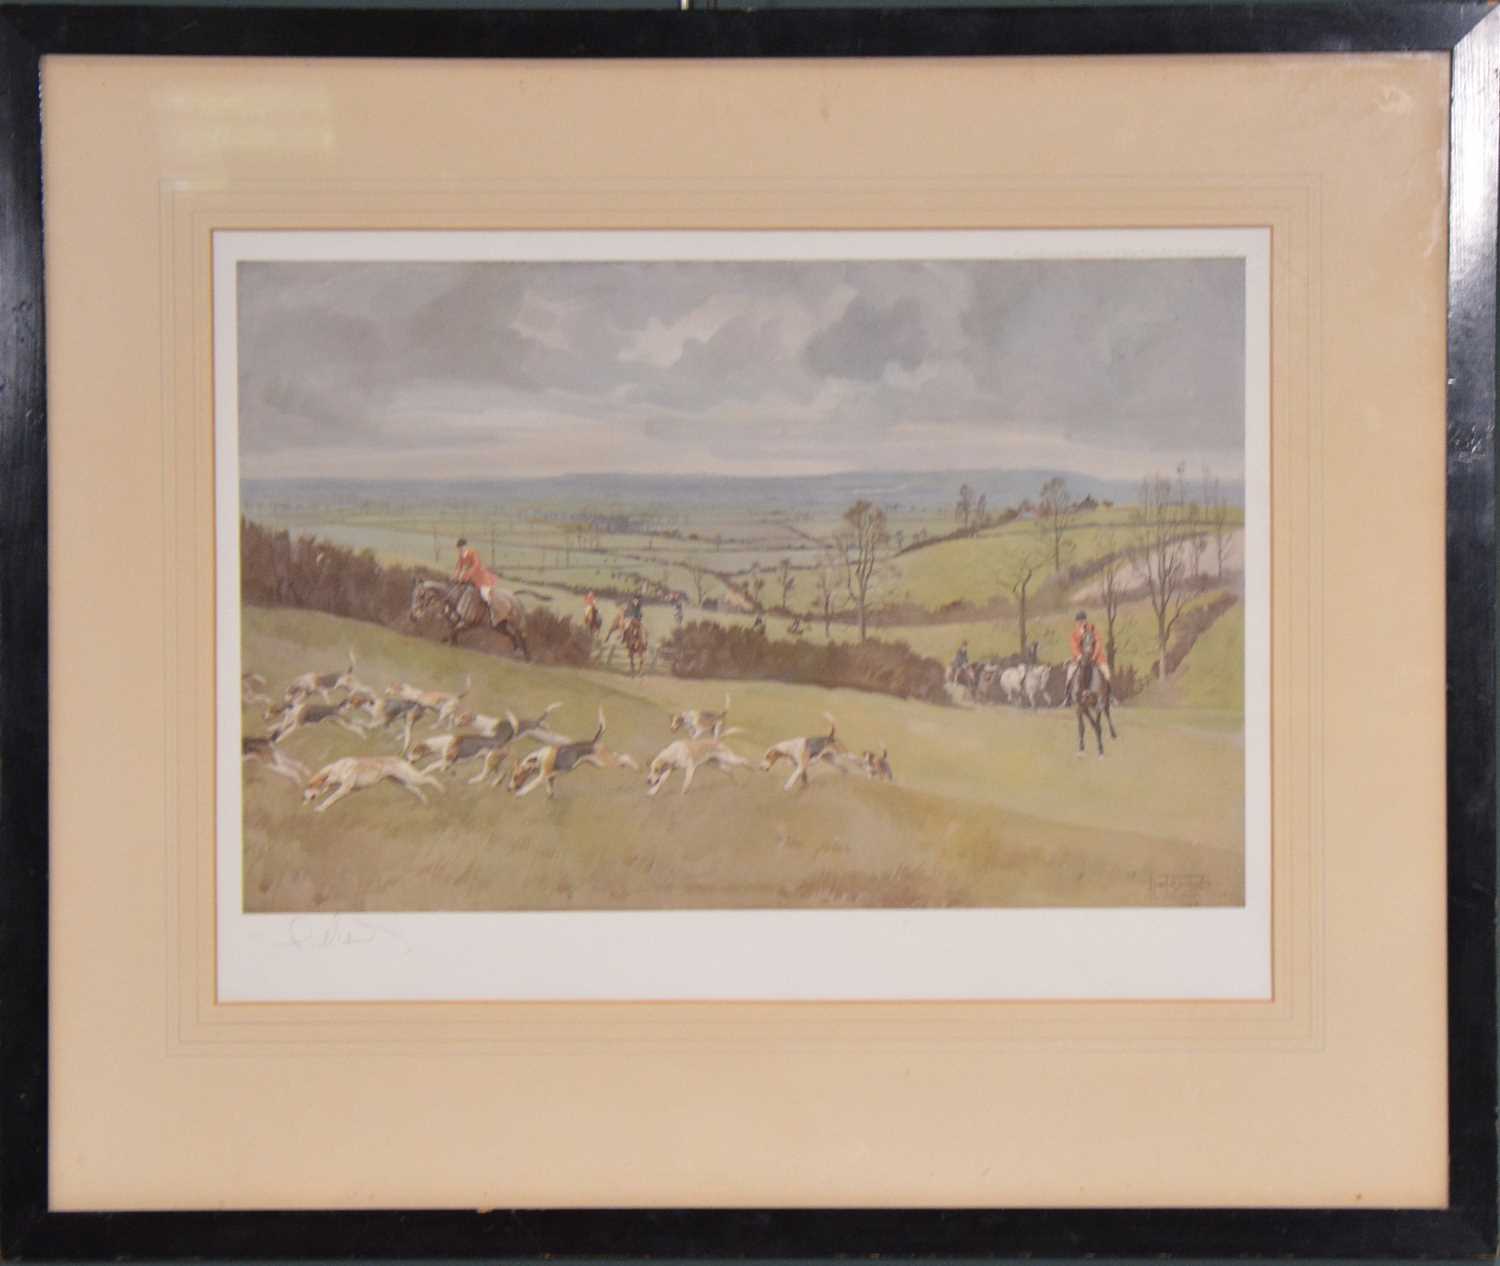 After Lionel Edwards, Hunting Countries - The Cotswold and The Waddon Chase, and other prints. - Image 6 of 14